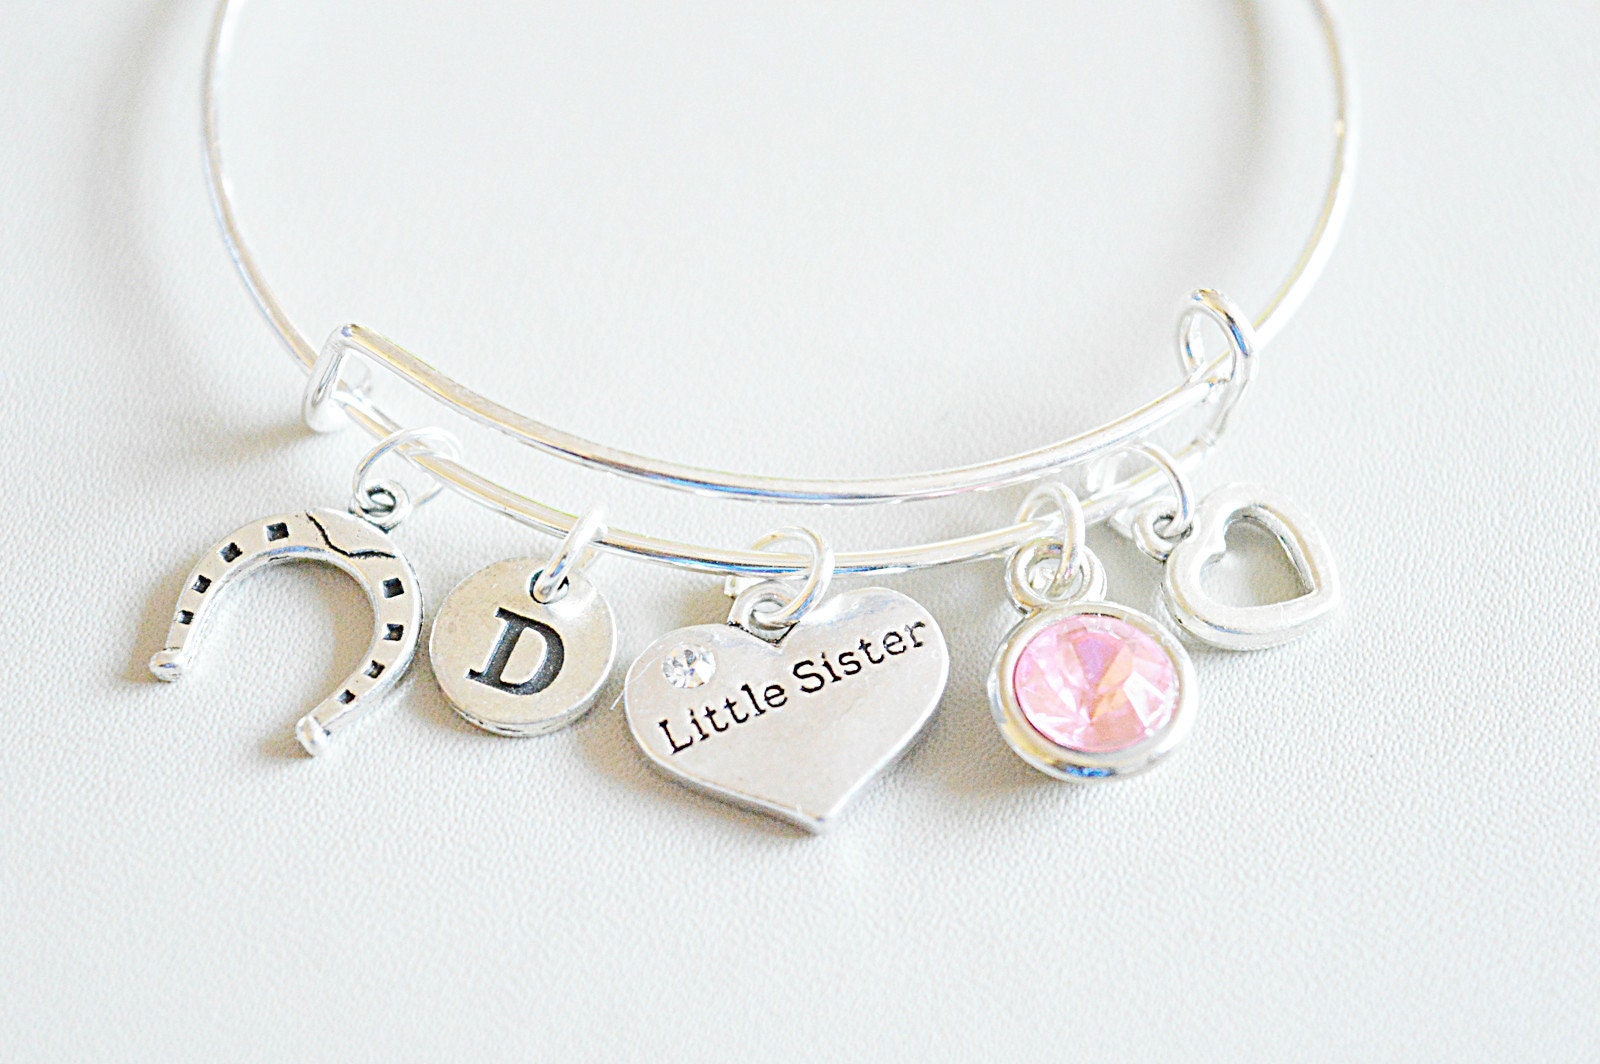 Little Sister Gift, Little Sister Jewelry, Little Sister Bracelet, Lil Sis Gift, Lil Sis Bracelet, Little Sister Bangle, Personalised Sister